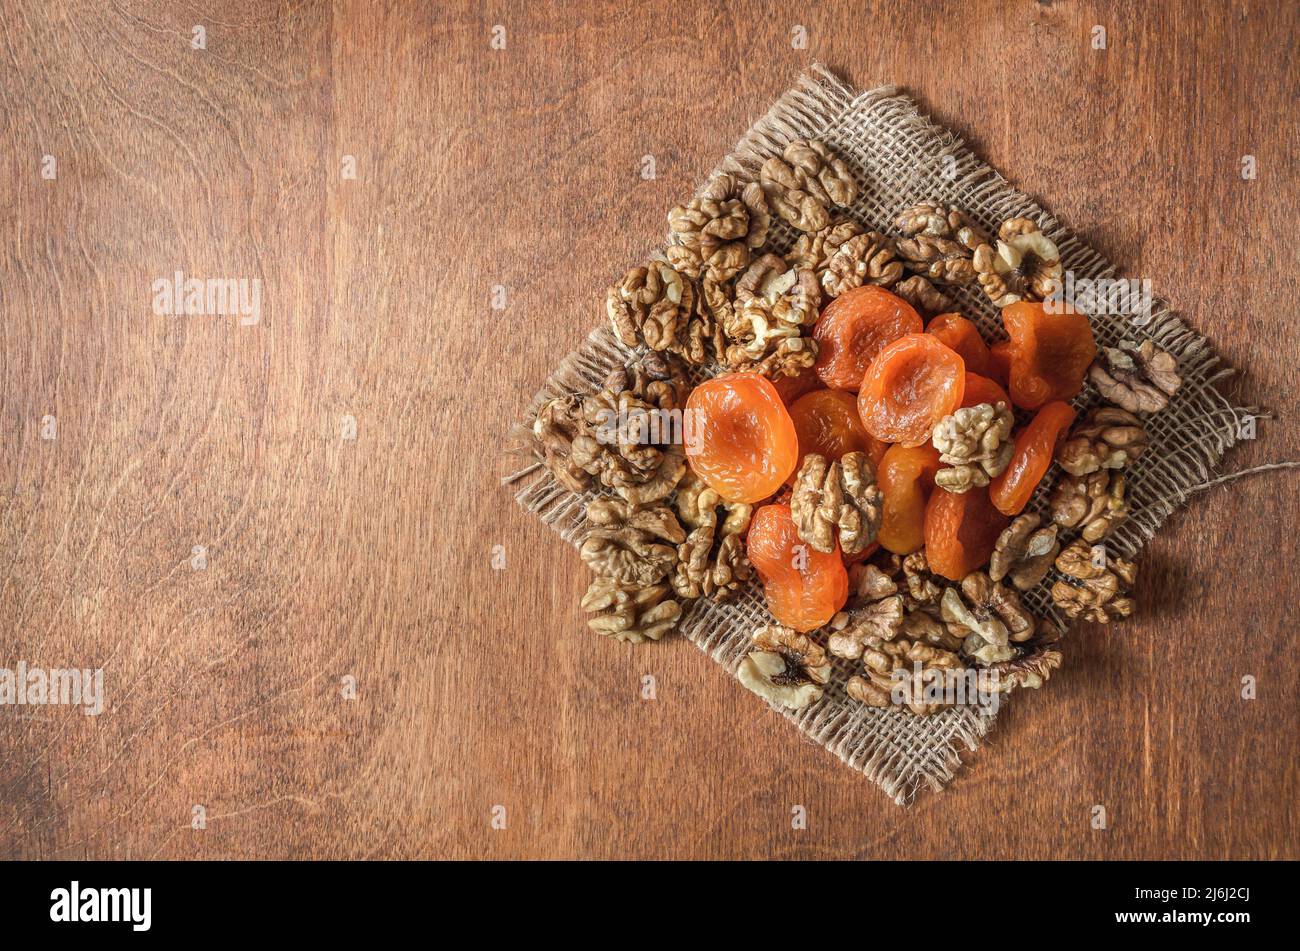 nuts and other fruits on a wooden background Stock Photo